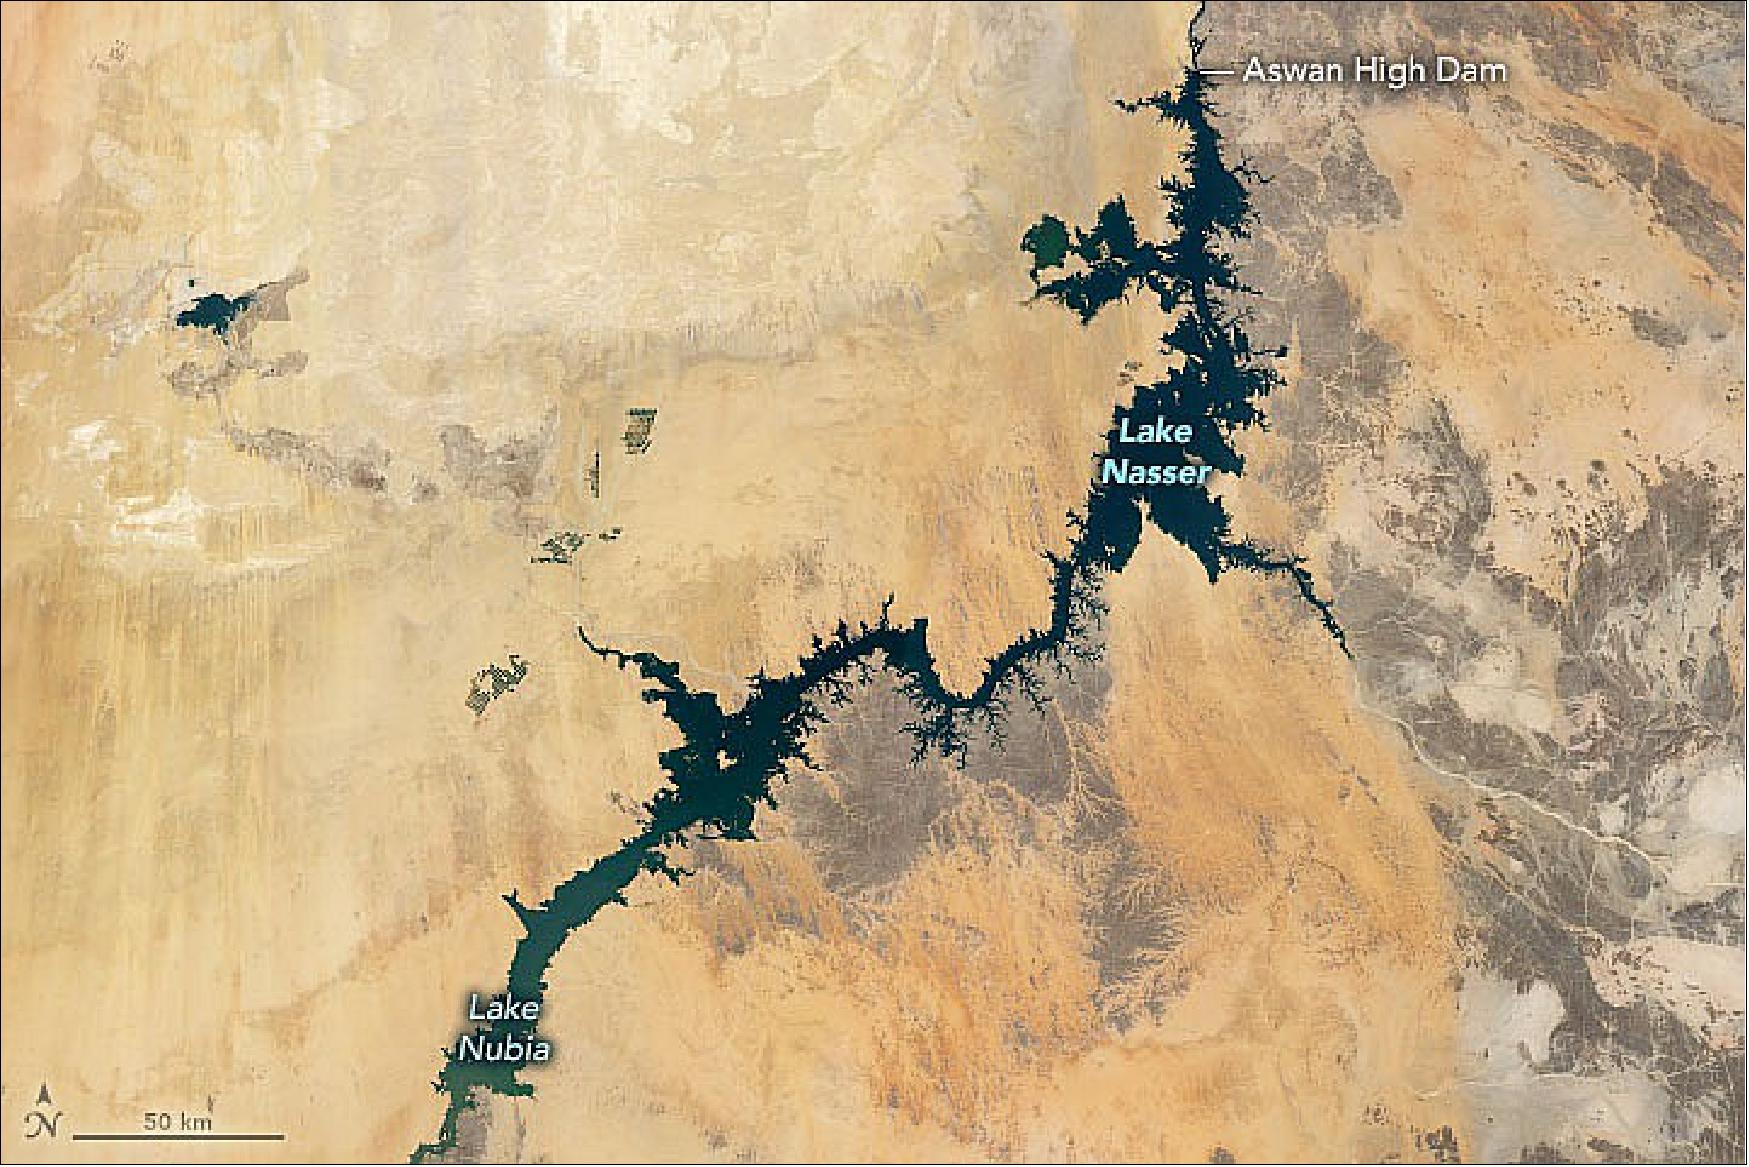 Figure 32: MODIS instrument image of Lake Nasser acquired with NASA's Terra satellite (image credit: NASA Earth Observatory)